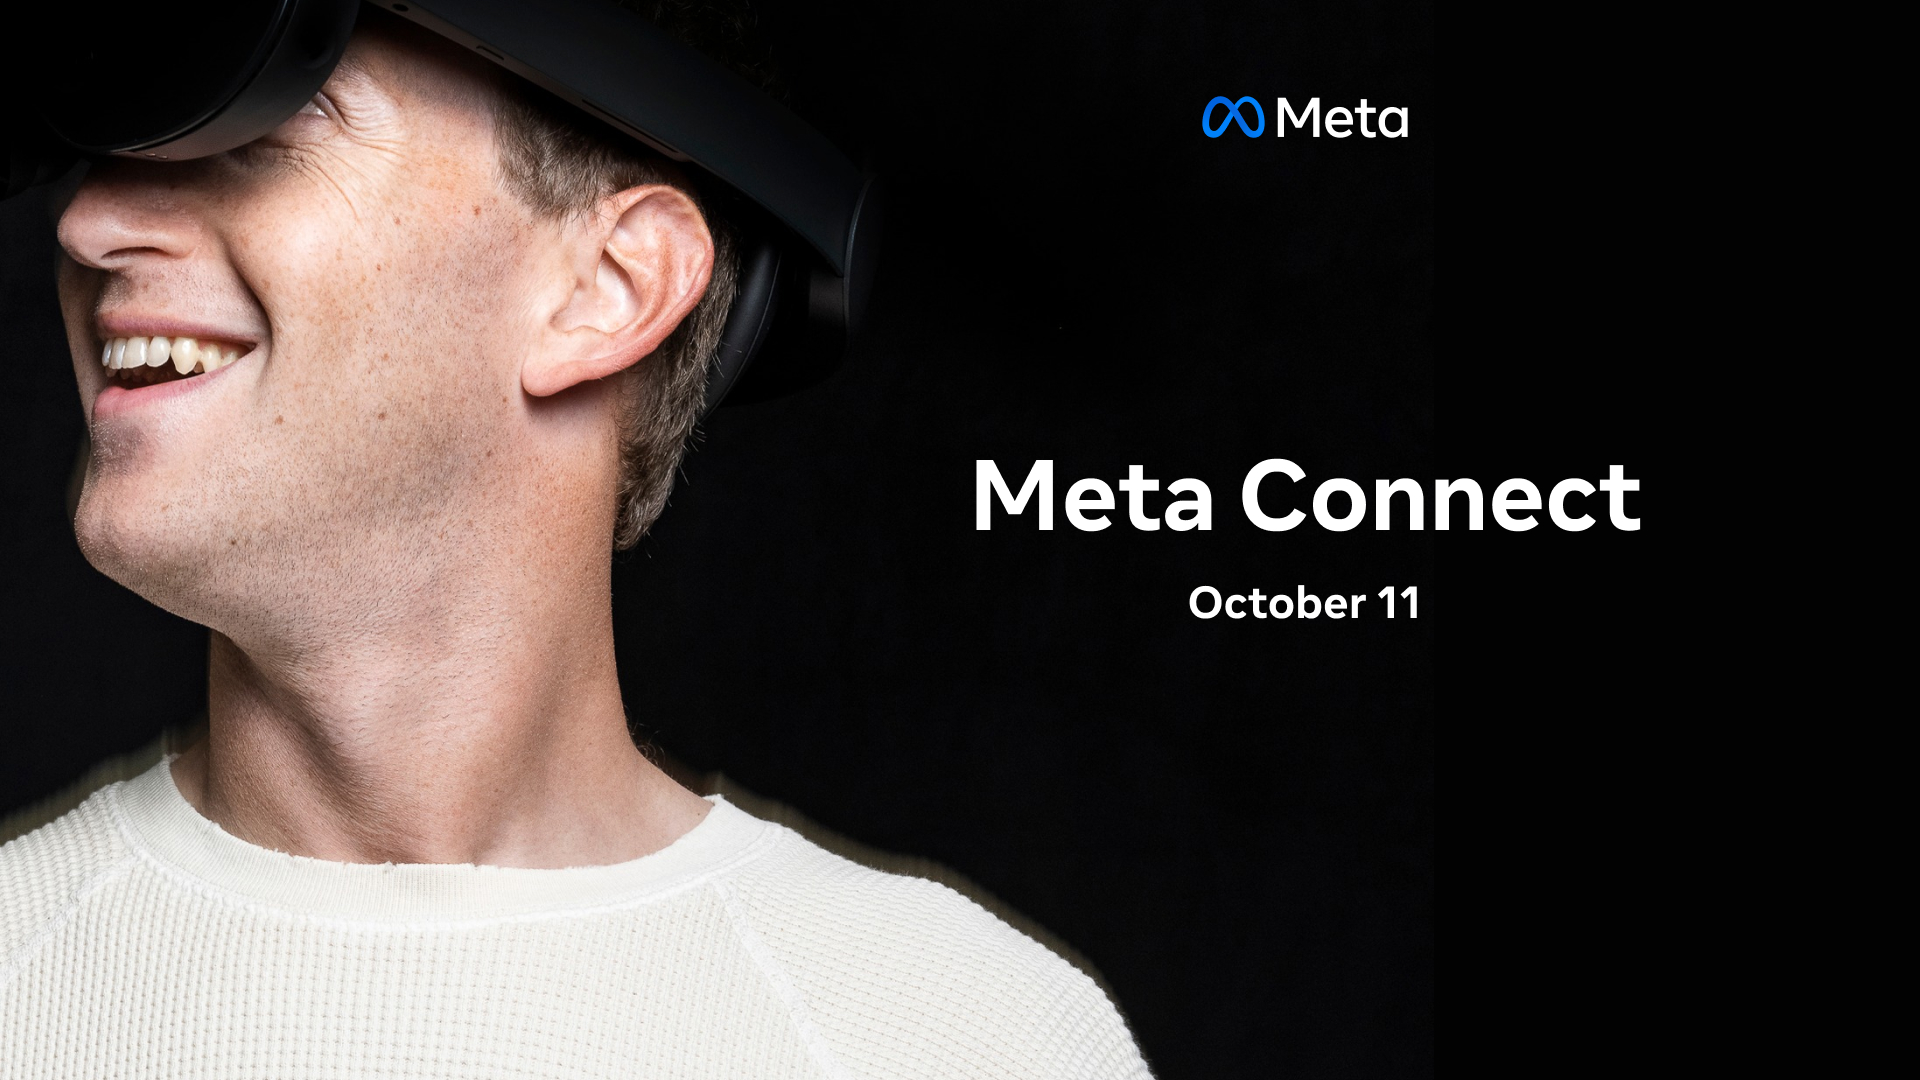 Mark Zuckerberg wearing a VR headset. Text says "Meta Connect October 11"